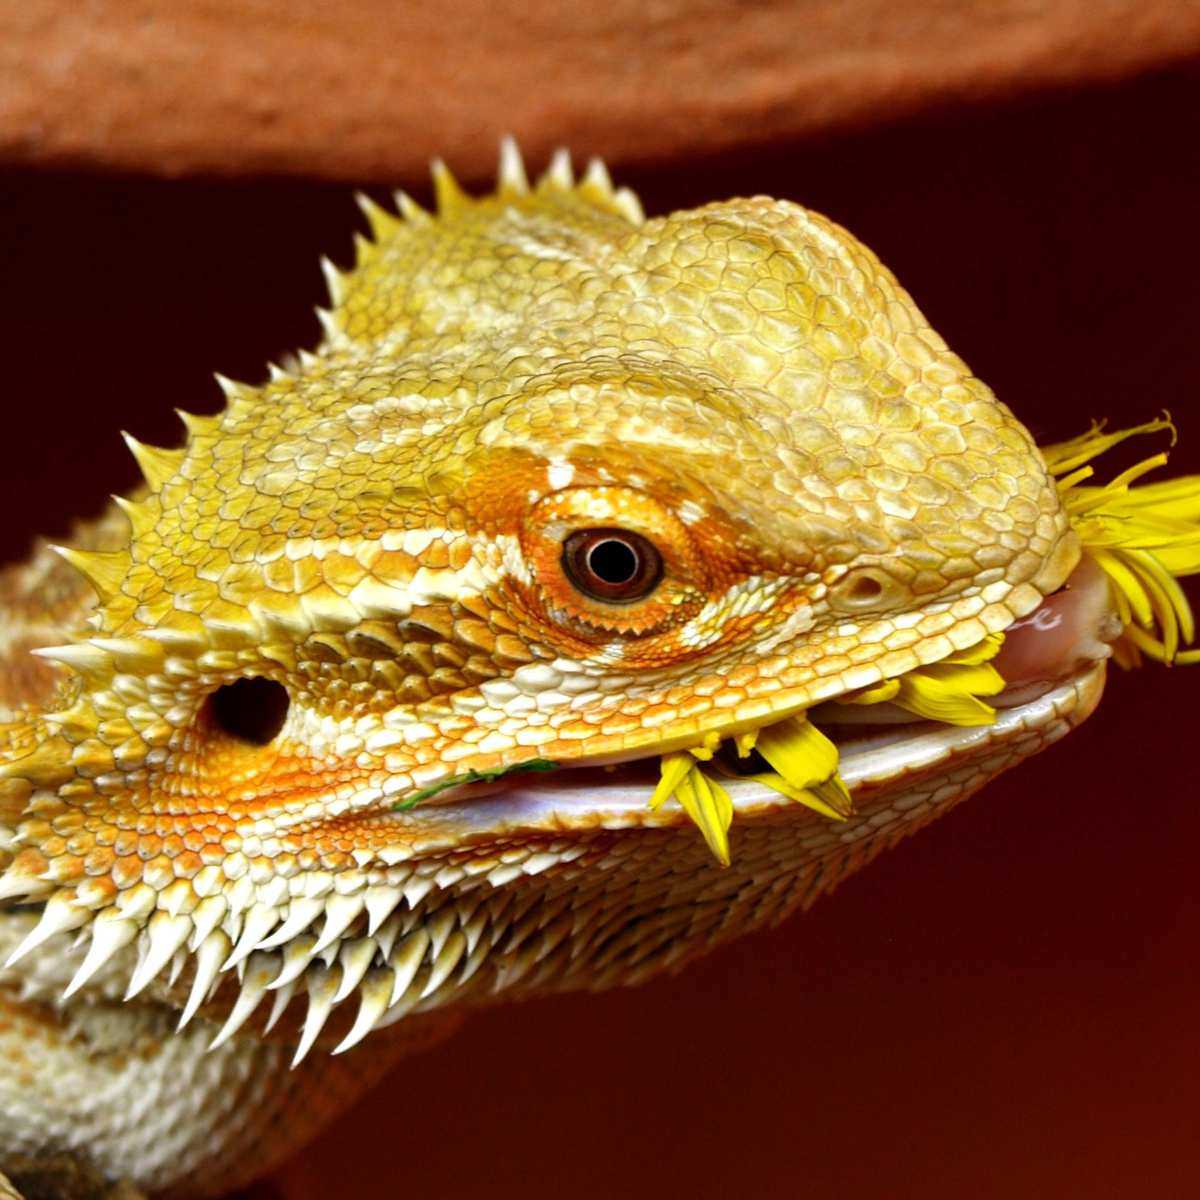 Can Bearded Dragons Eat Basil Flowers?